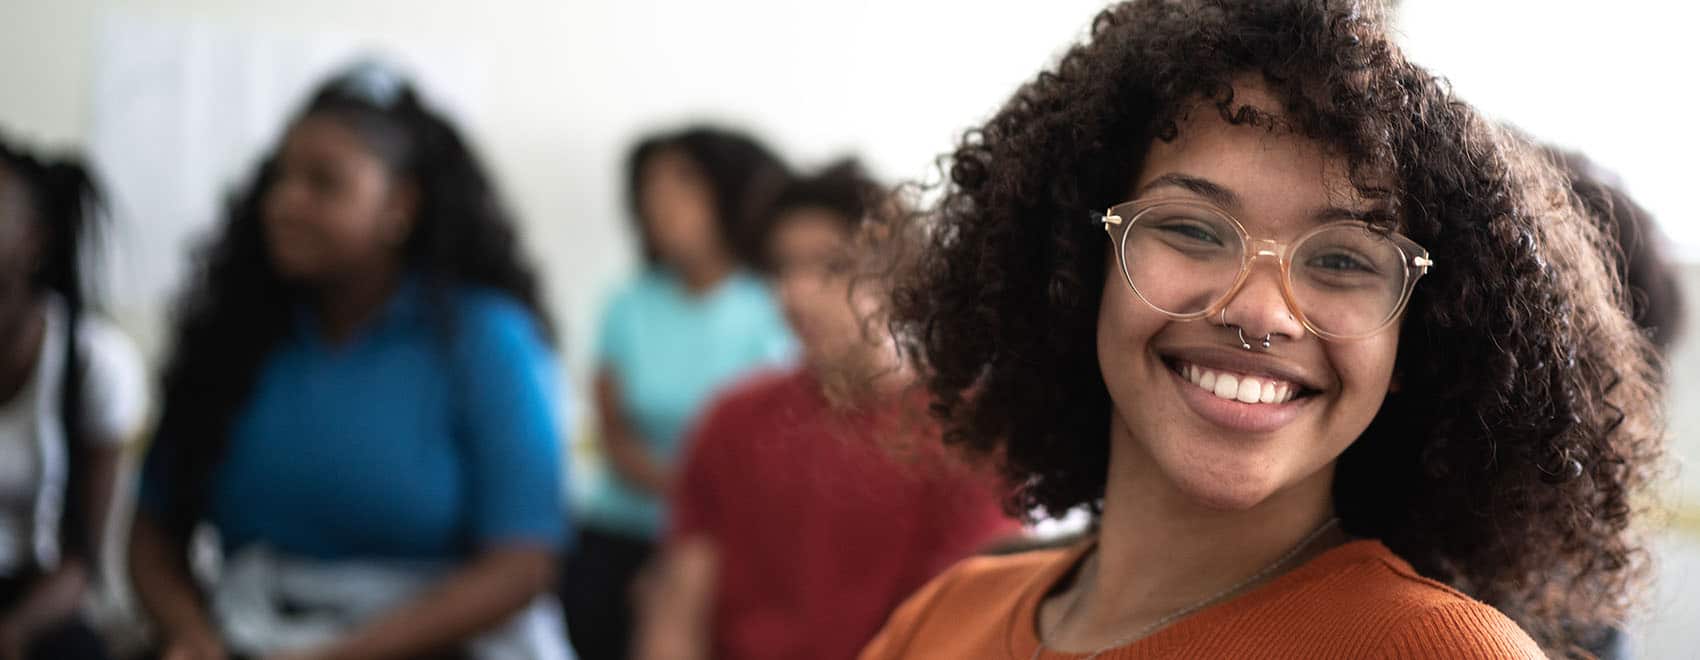 Portrait of a female student of color in a classroom smiling